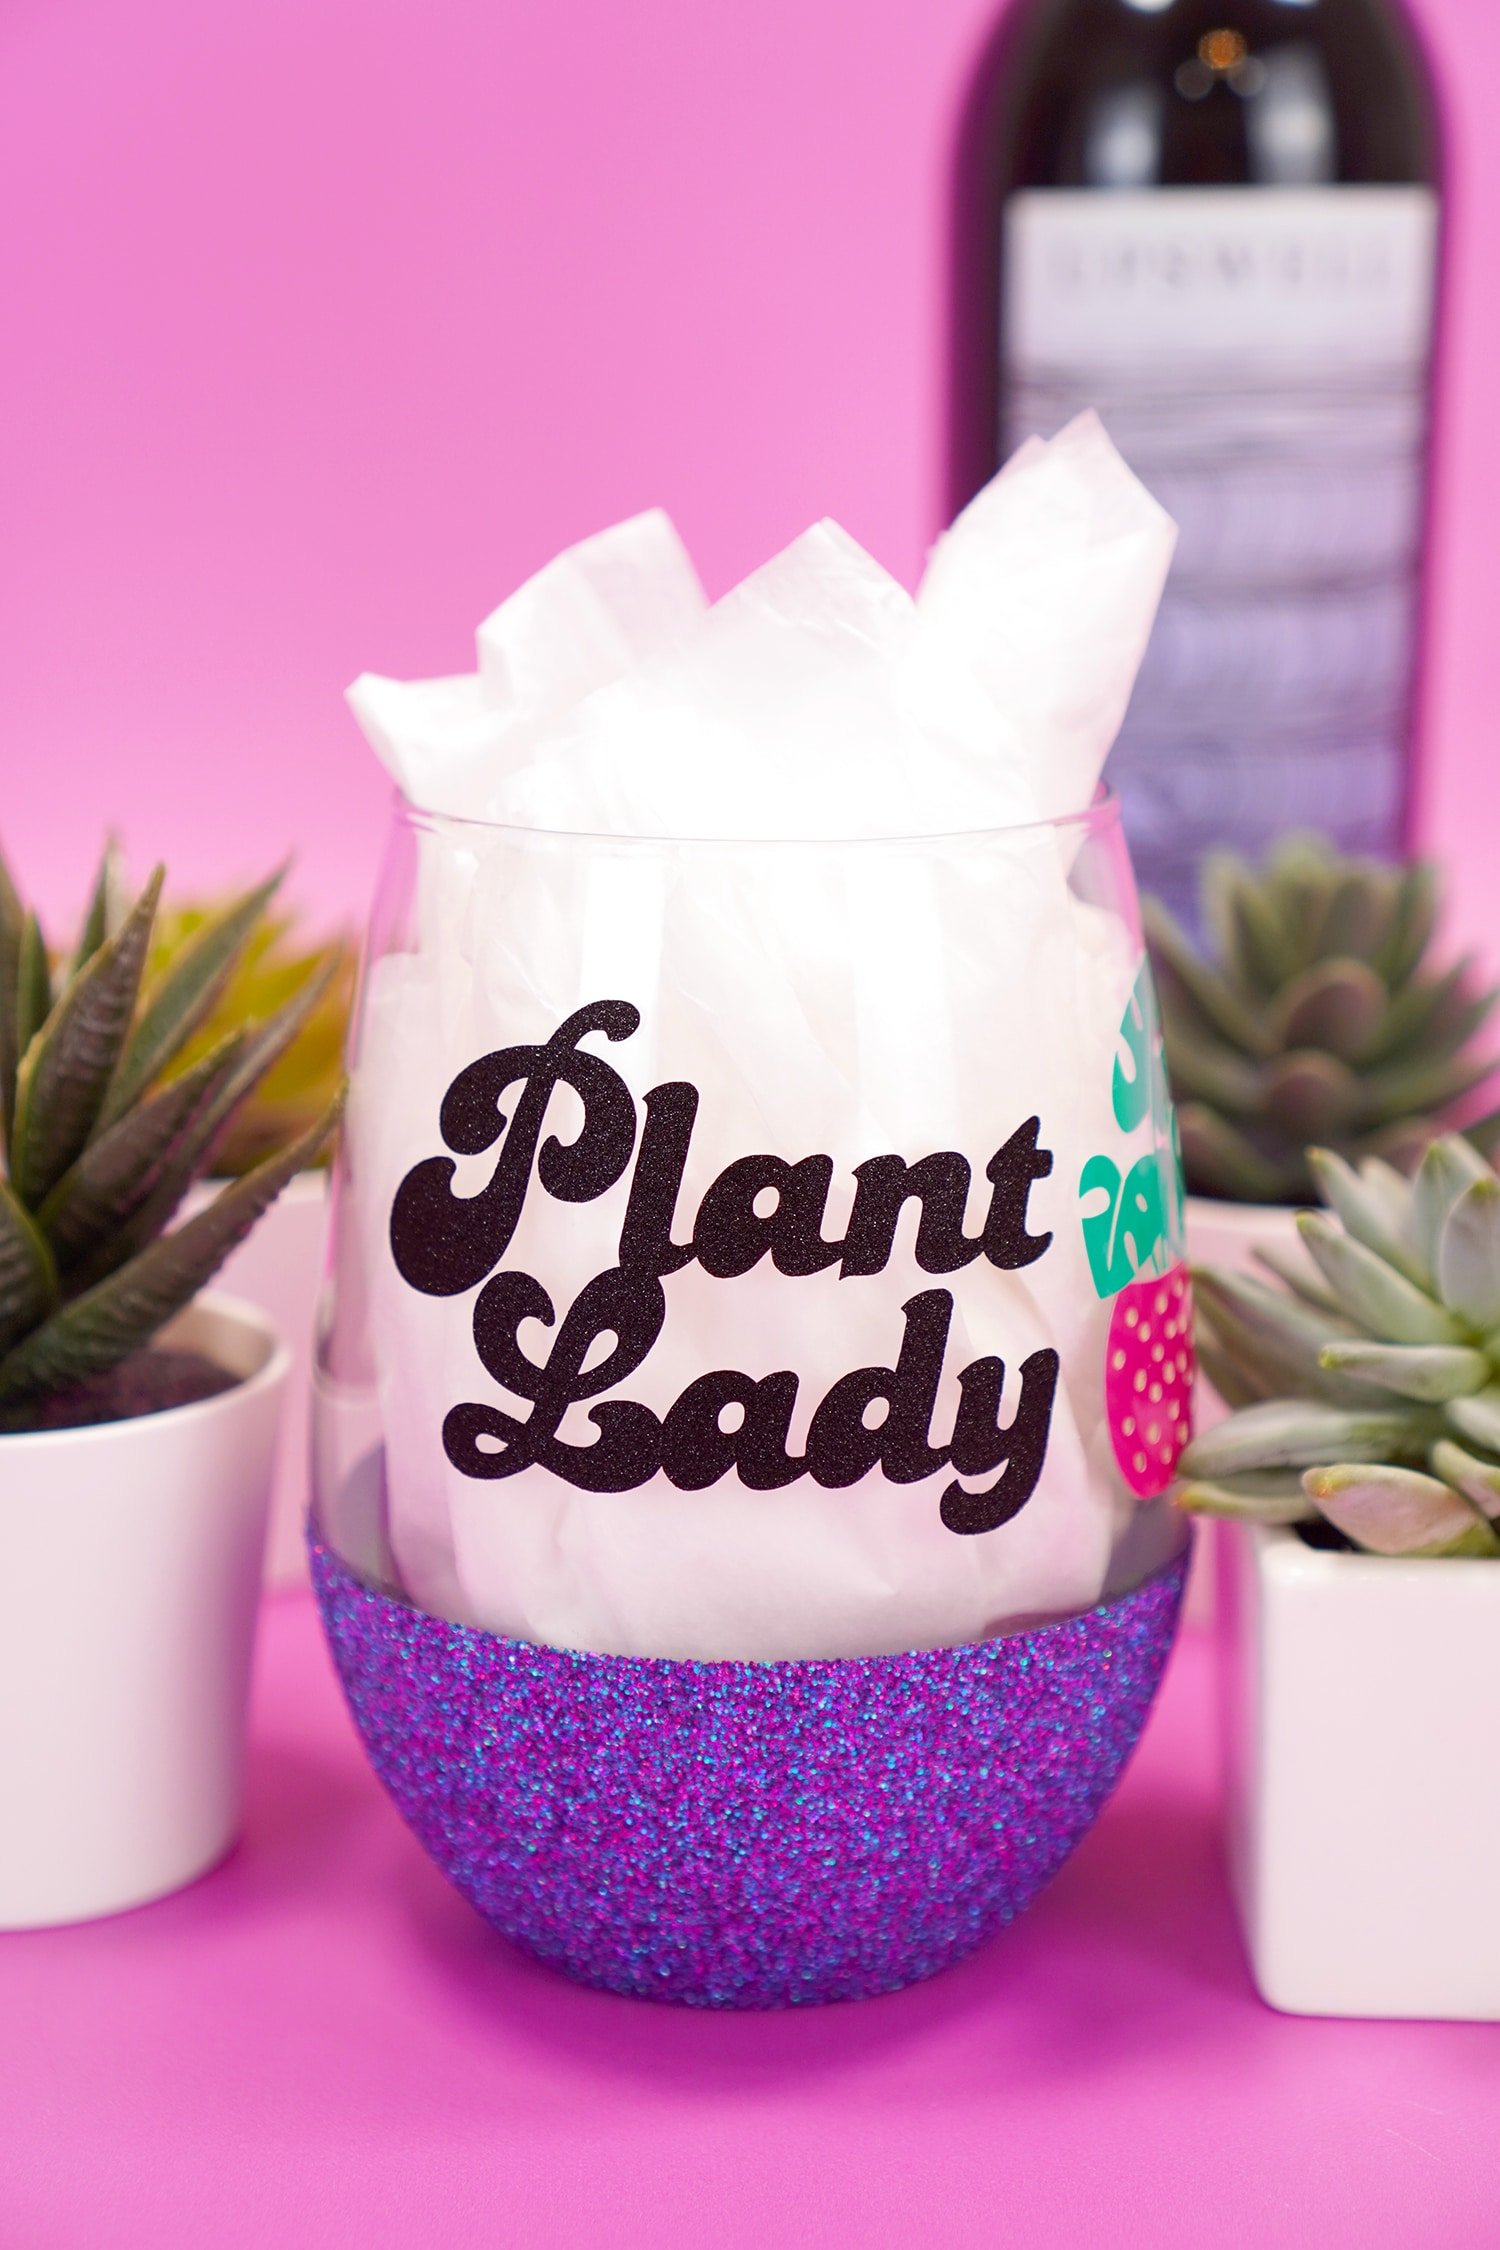 "Plant Lady" glitter wine glass on purple background with wine bottle and plants in background